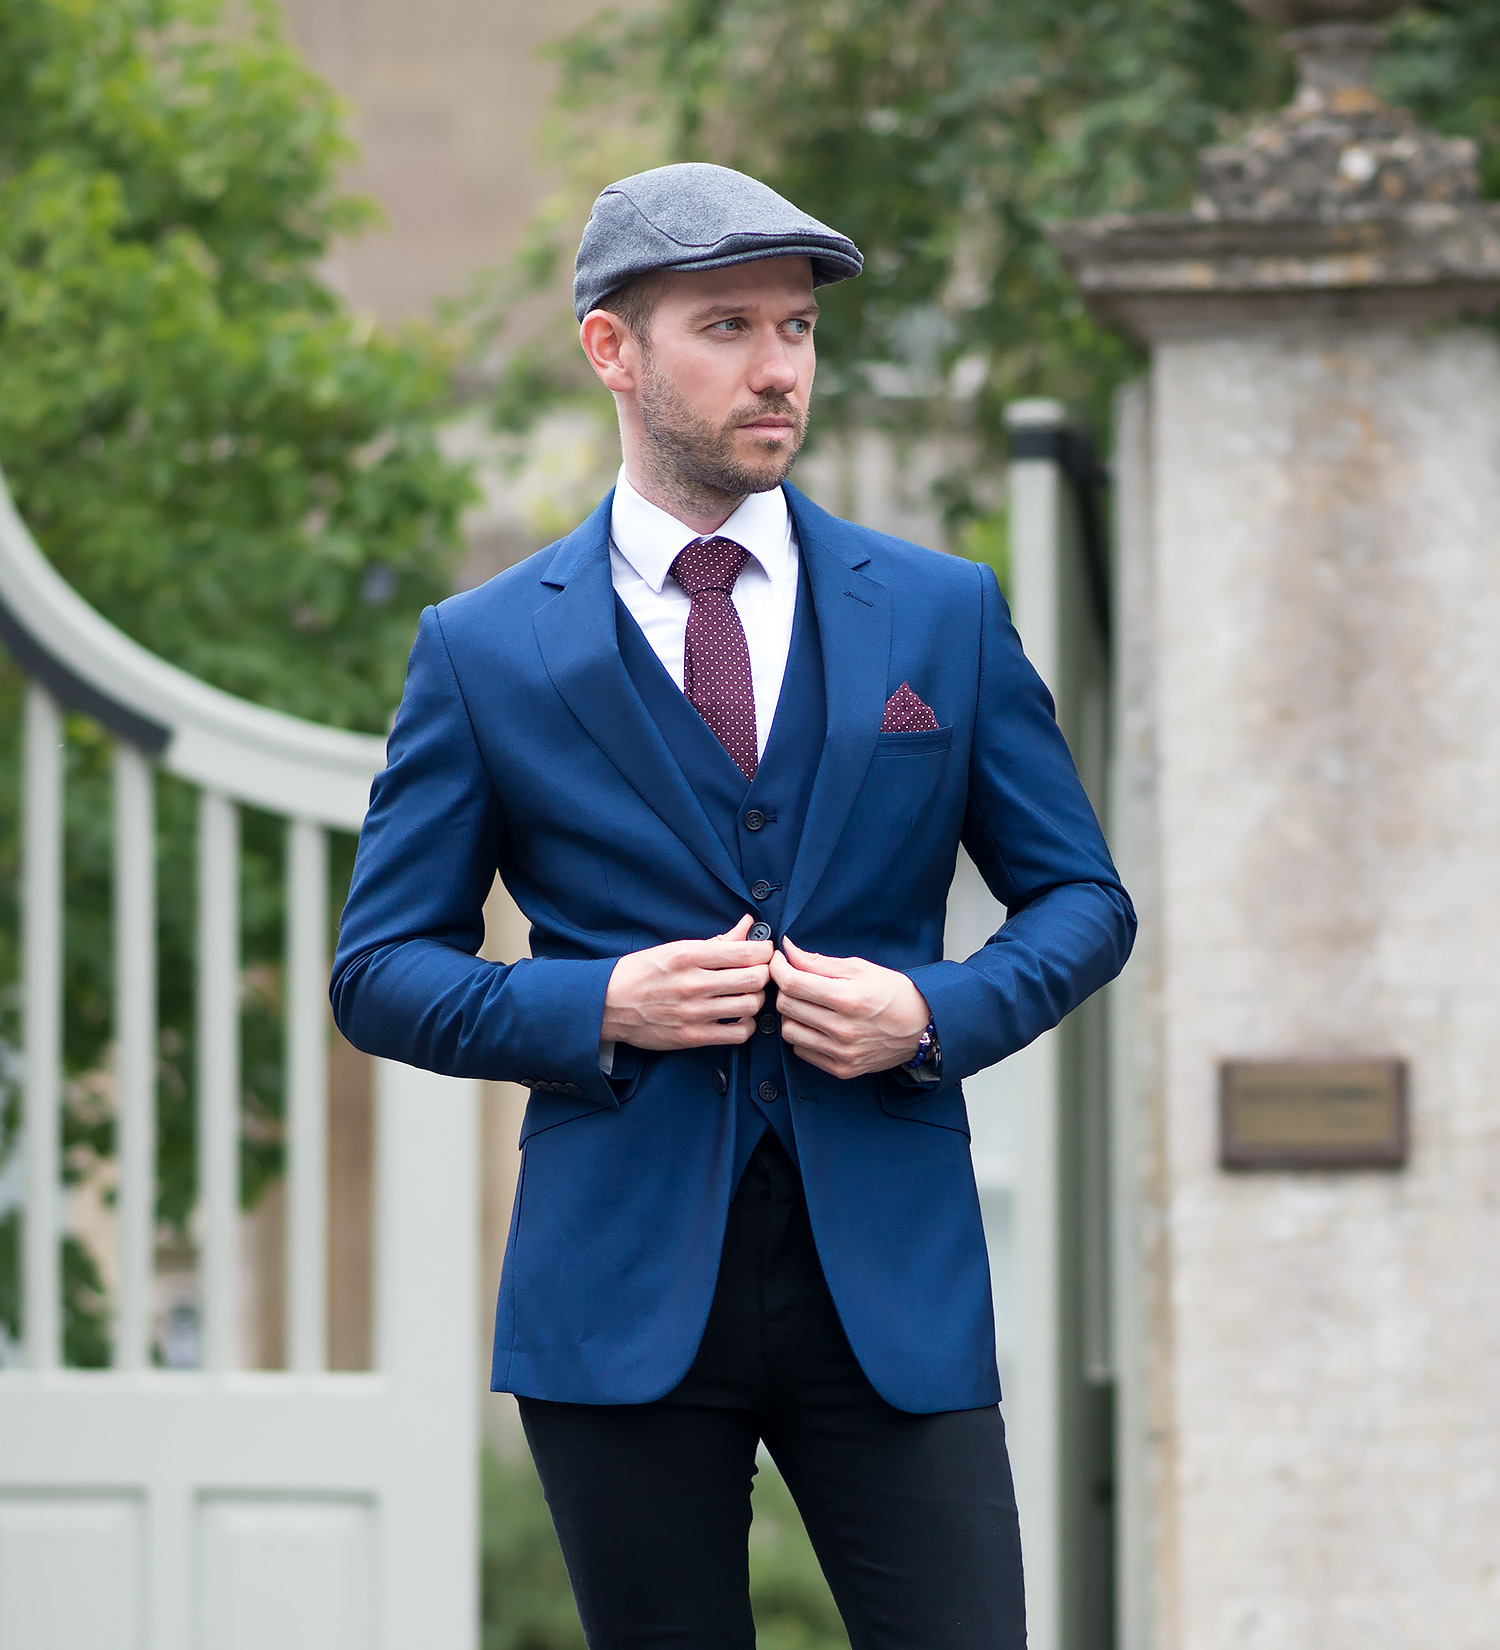 flat cap outfit